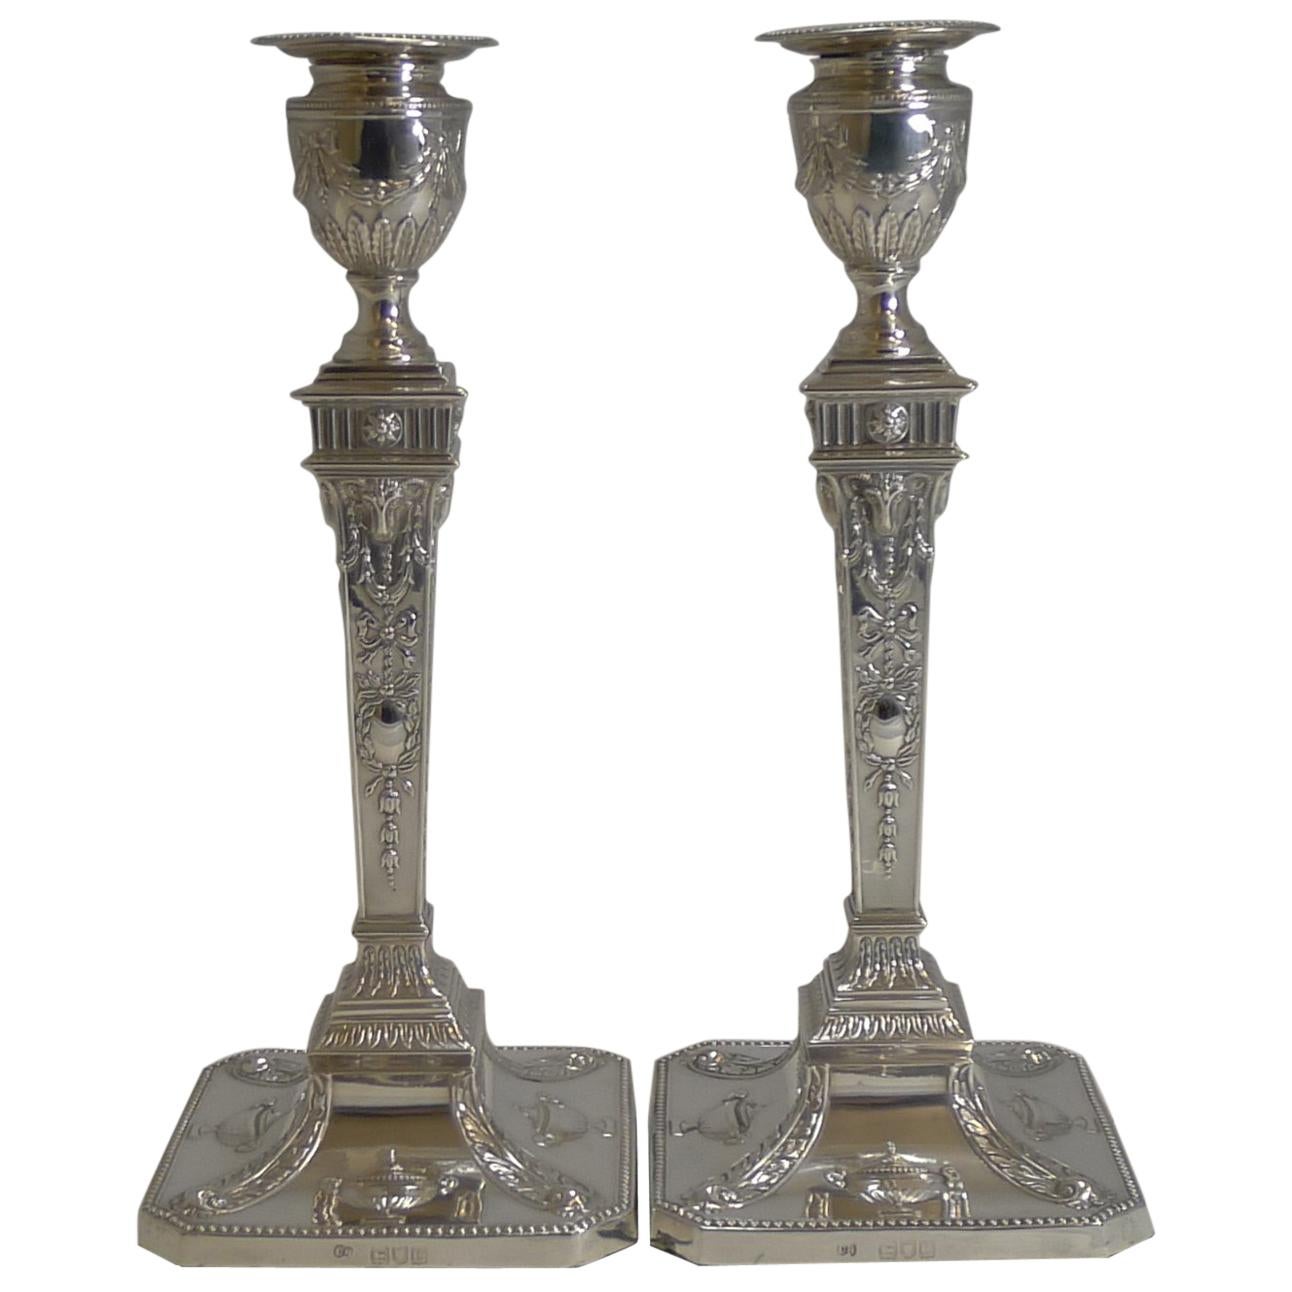 Antique English Sterling Silver Candlesticks  Adams Style, Ram's Heads, 1898